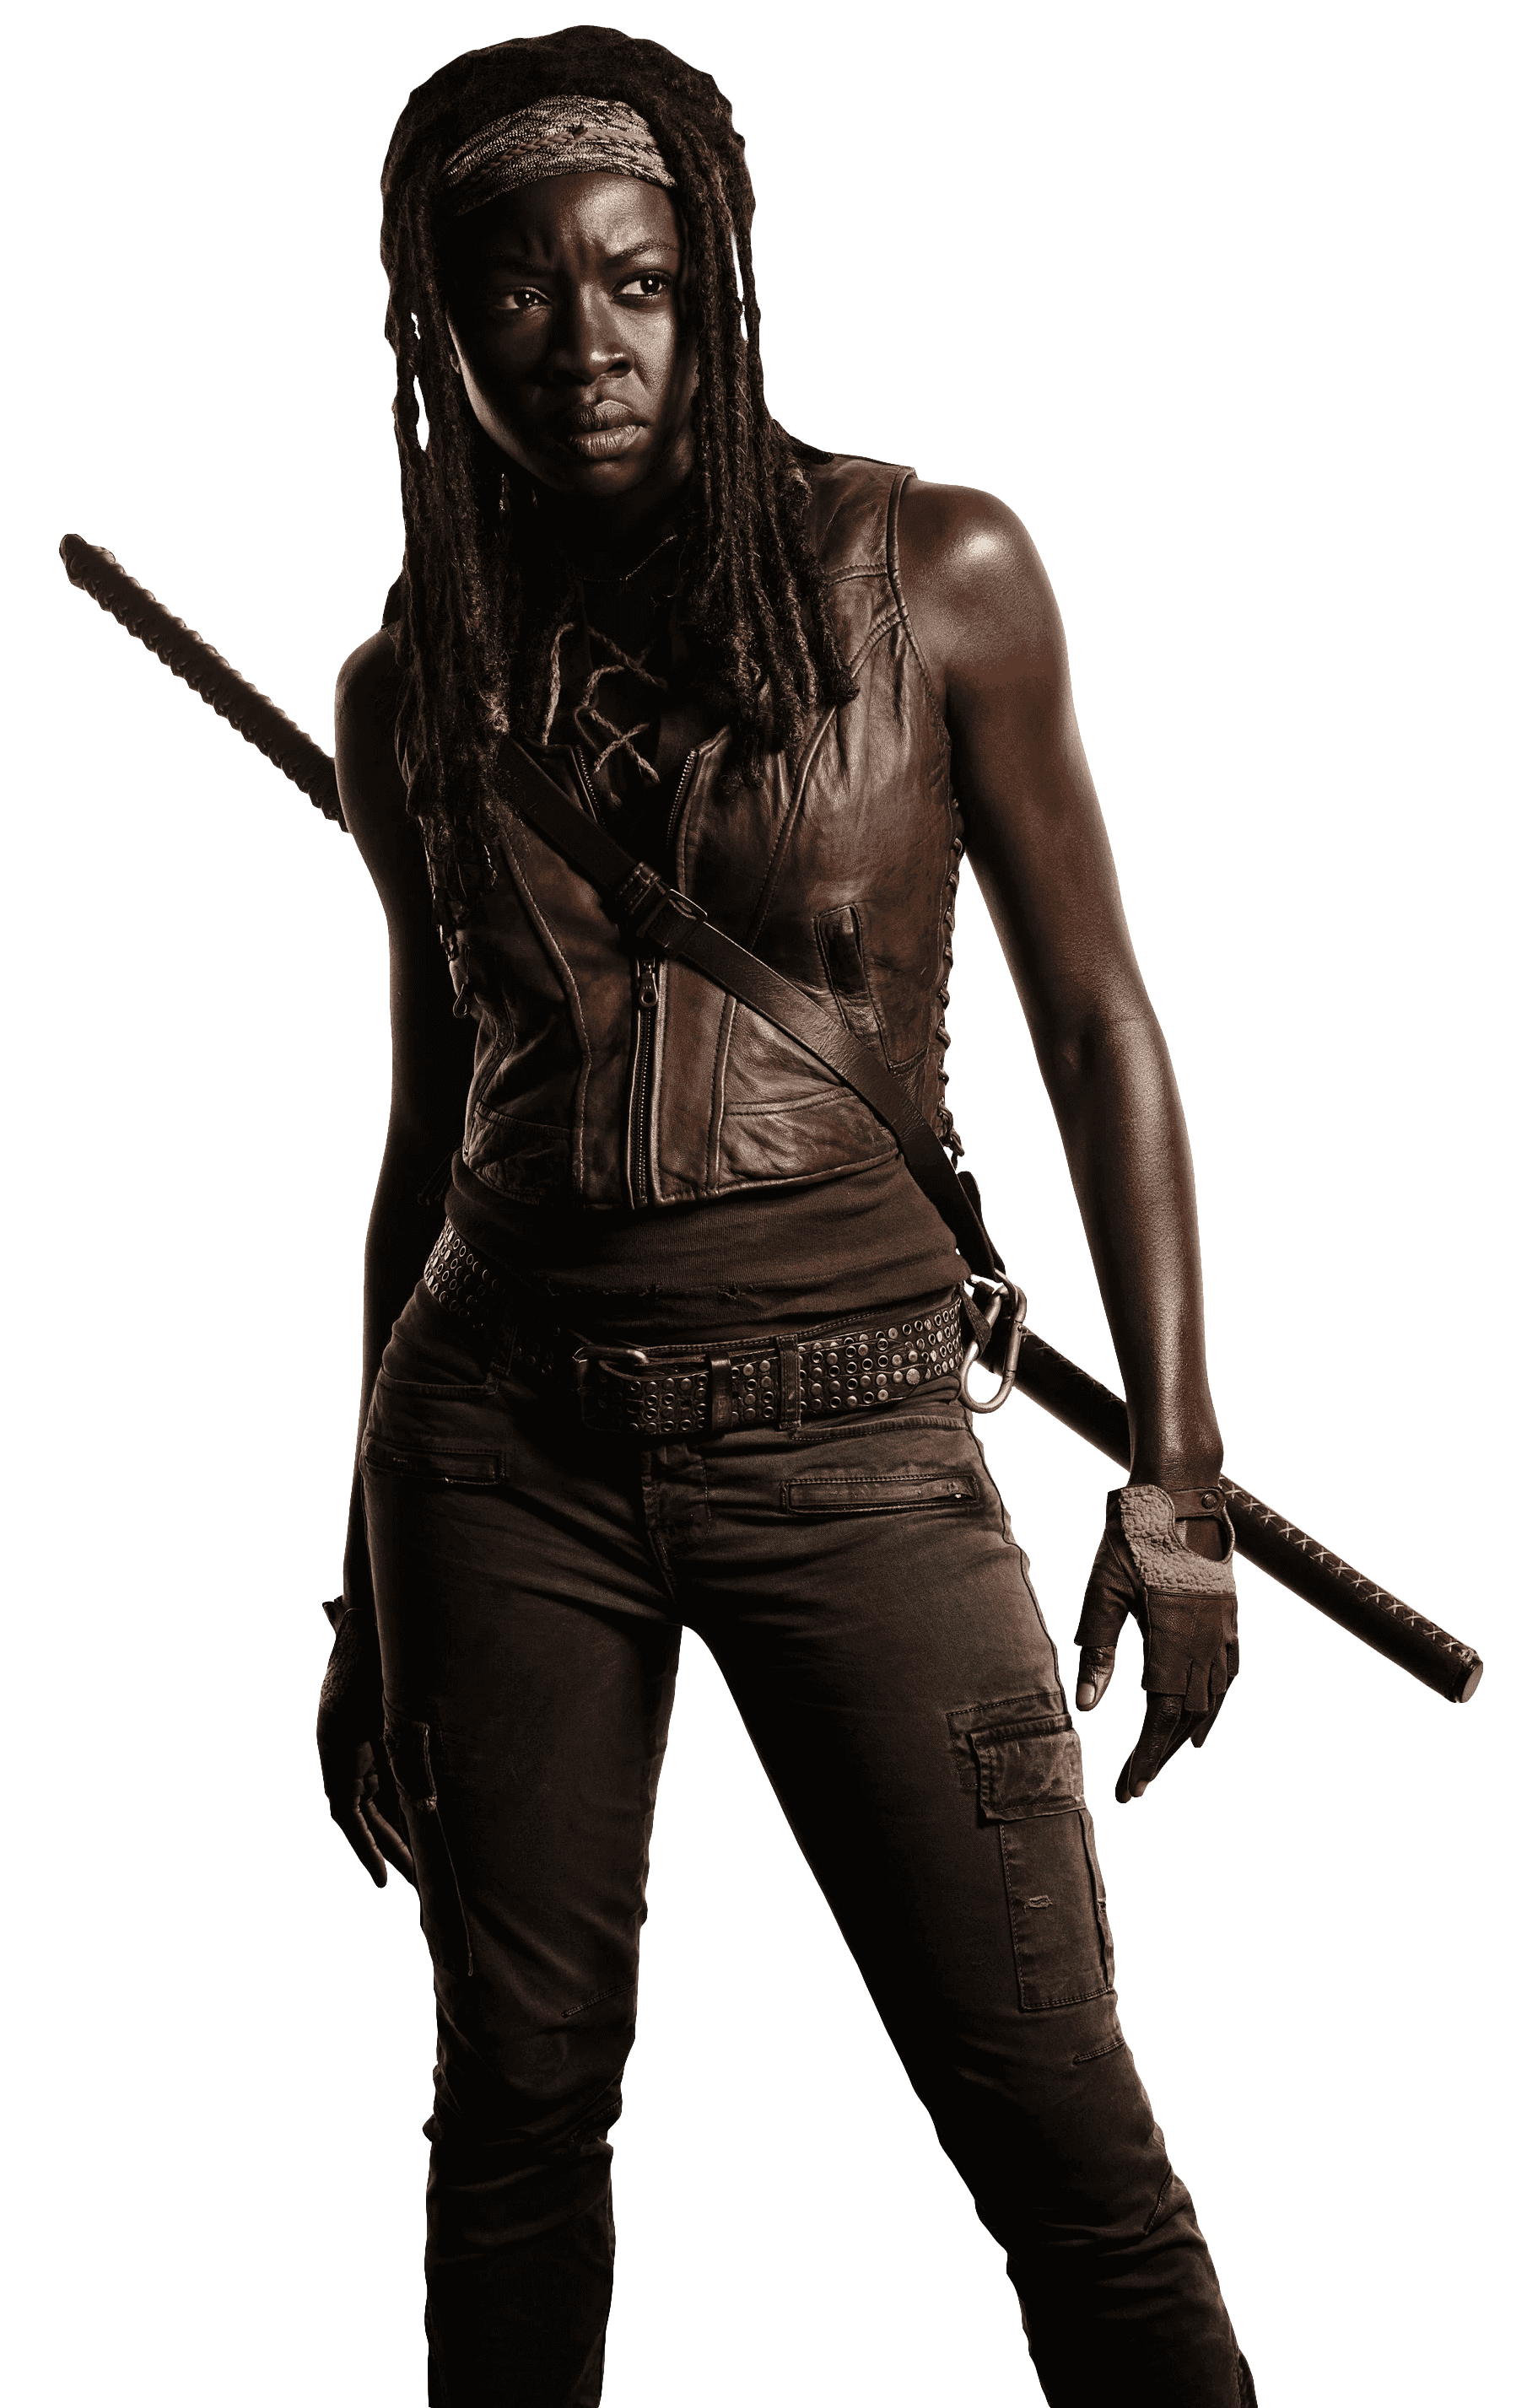 Danai Gurira plays as Michonne in the Walking Dead. She is wearing all brown with a fierce look on her face.